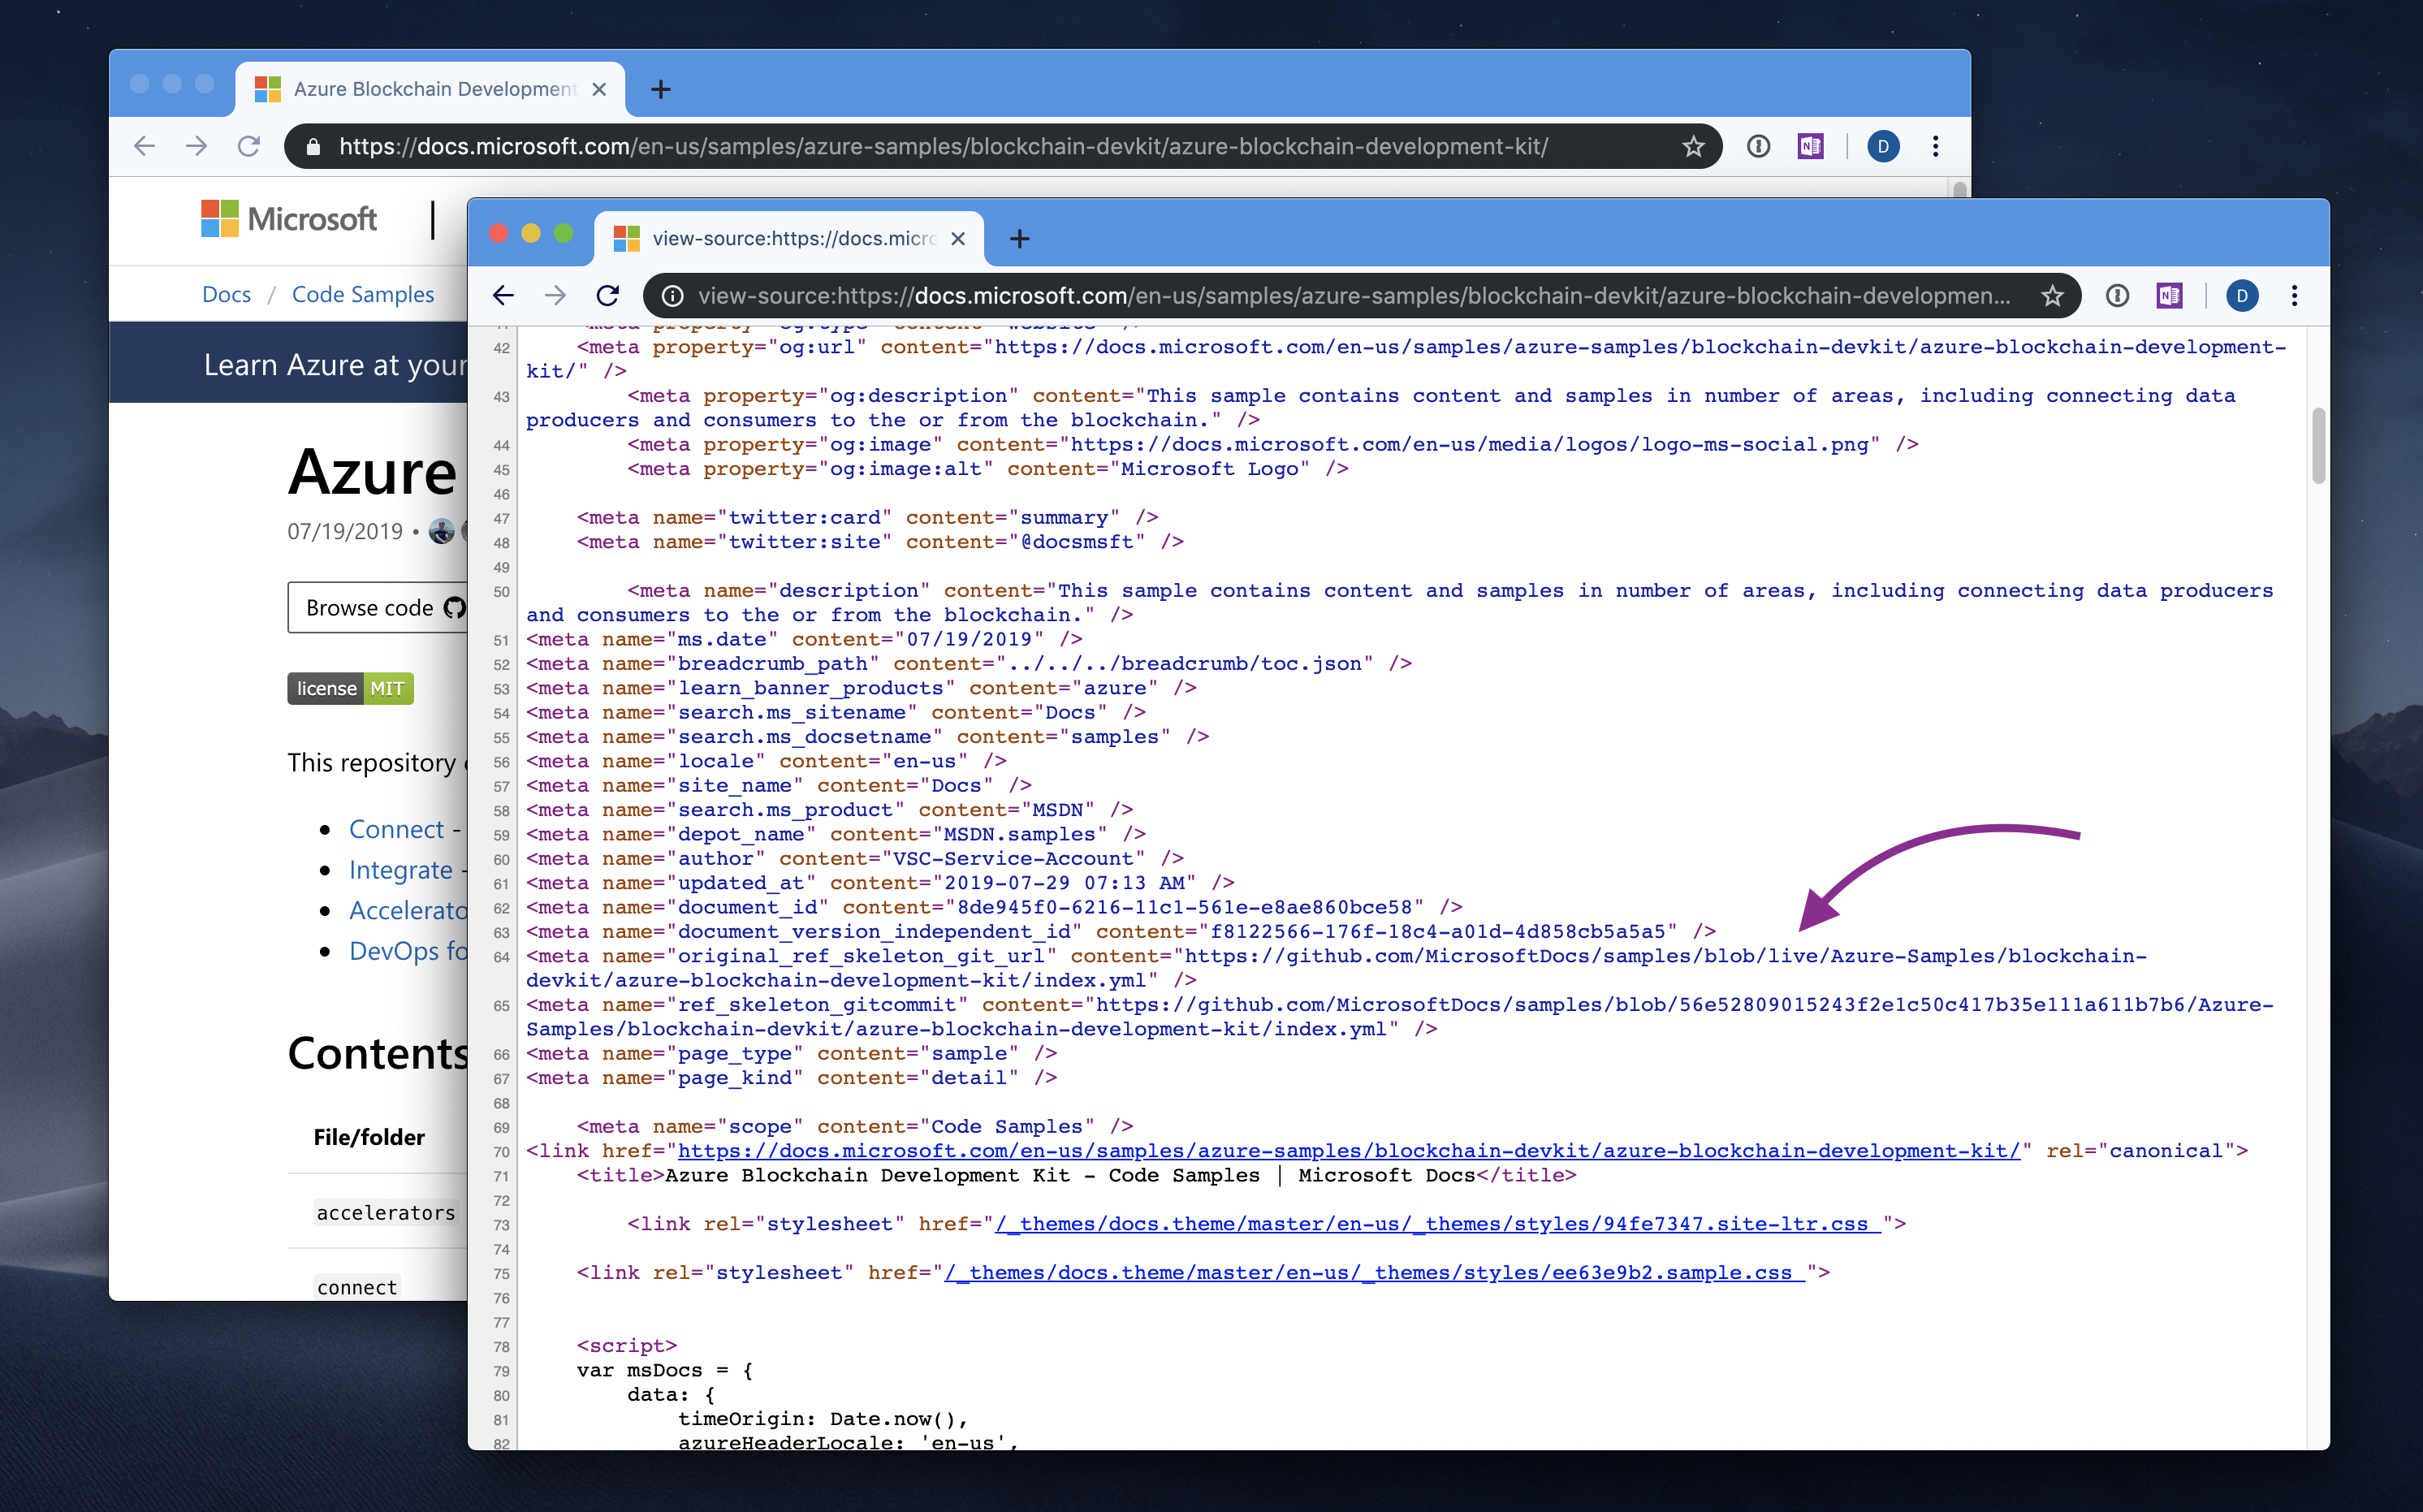 Screenshot showing the source of the sample page that points to a GitHub repo